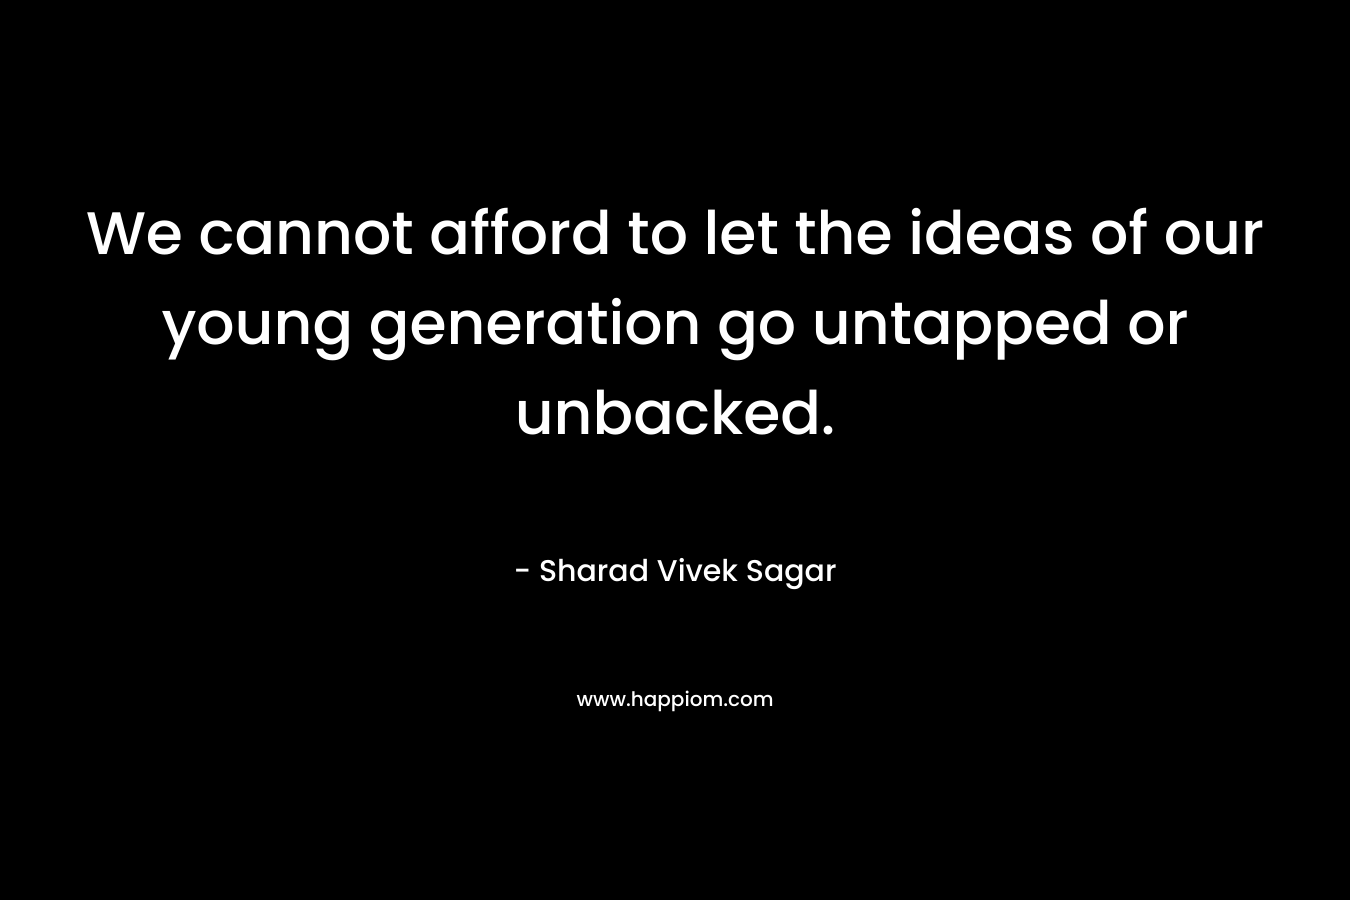 We cannot afford to let the ideas of our young generation go untapped or unbacked. – Sharad Vivek Sagar